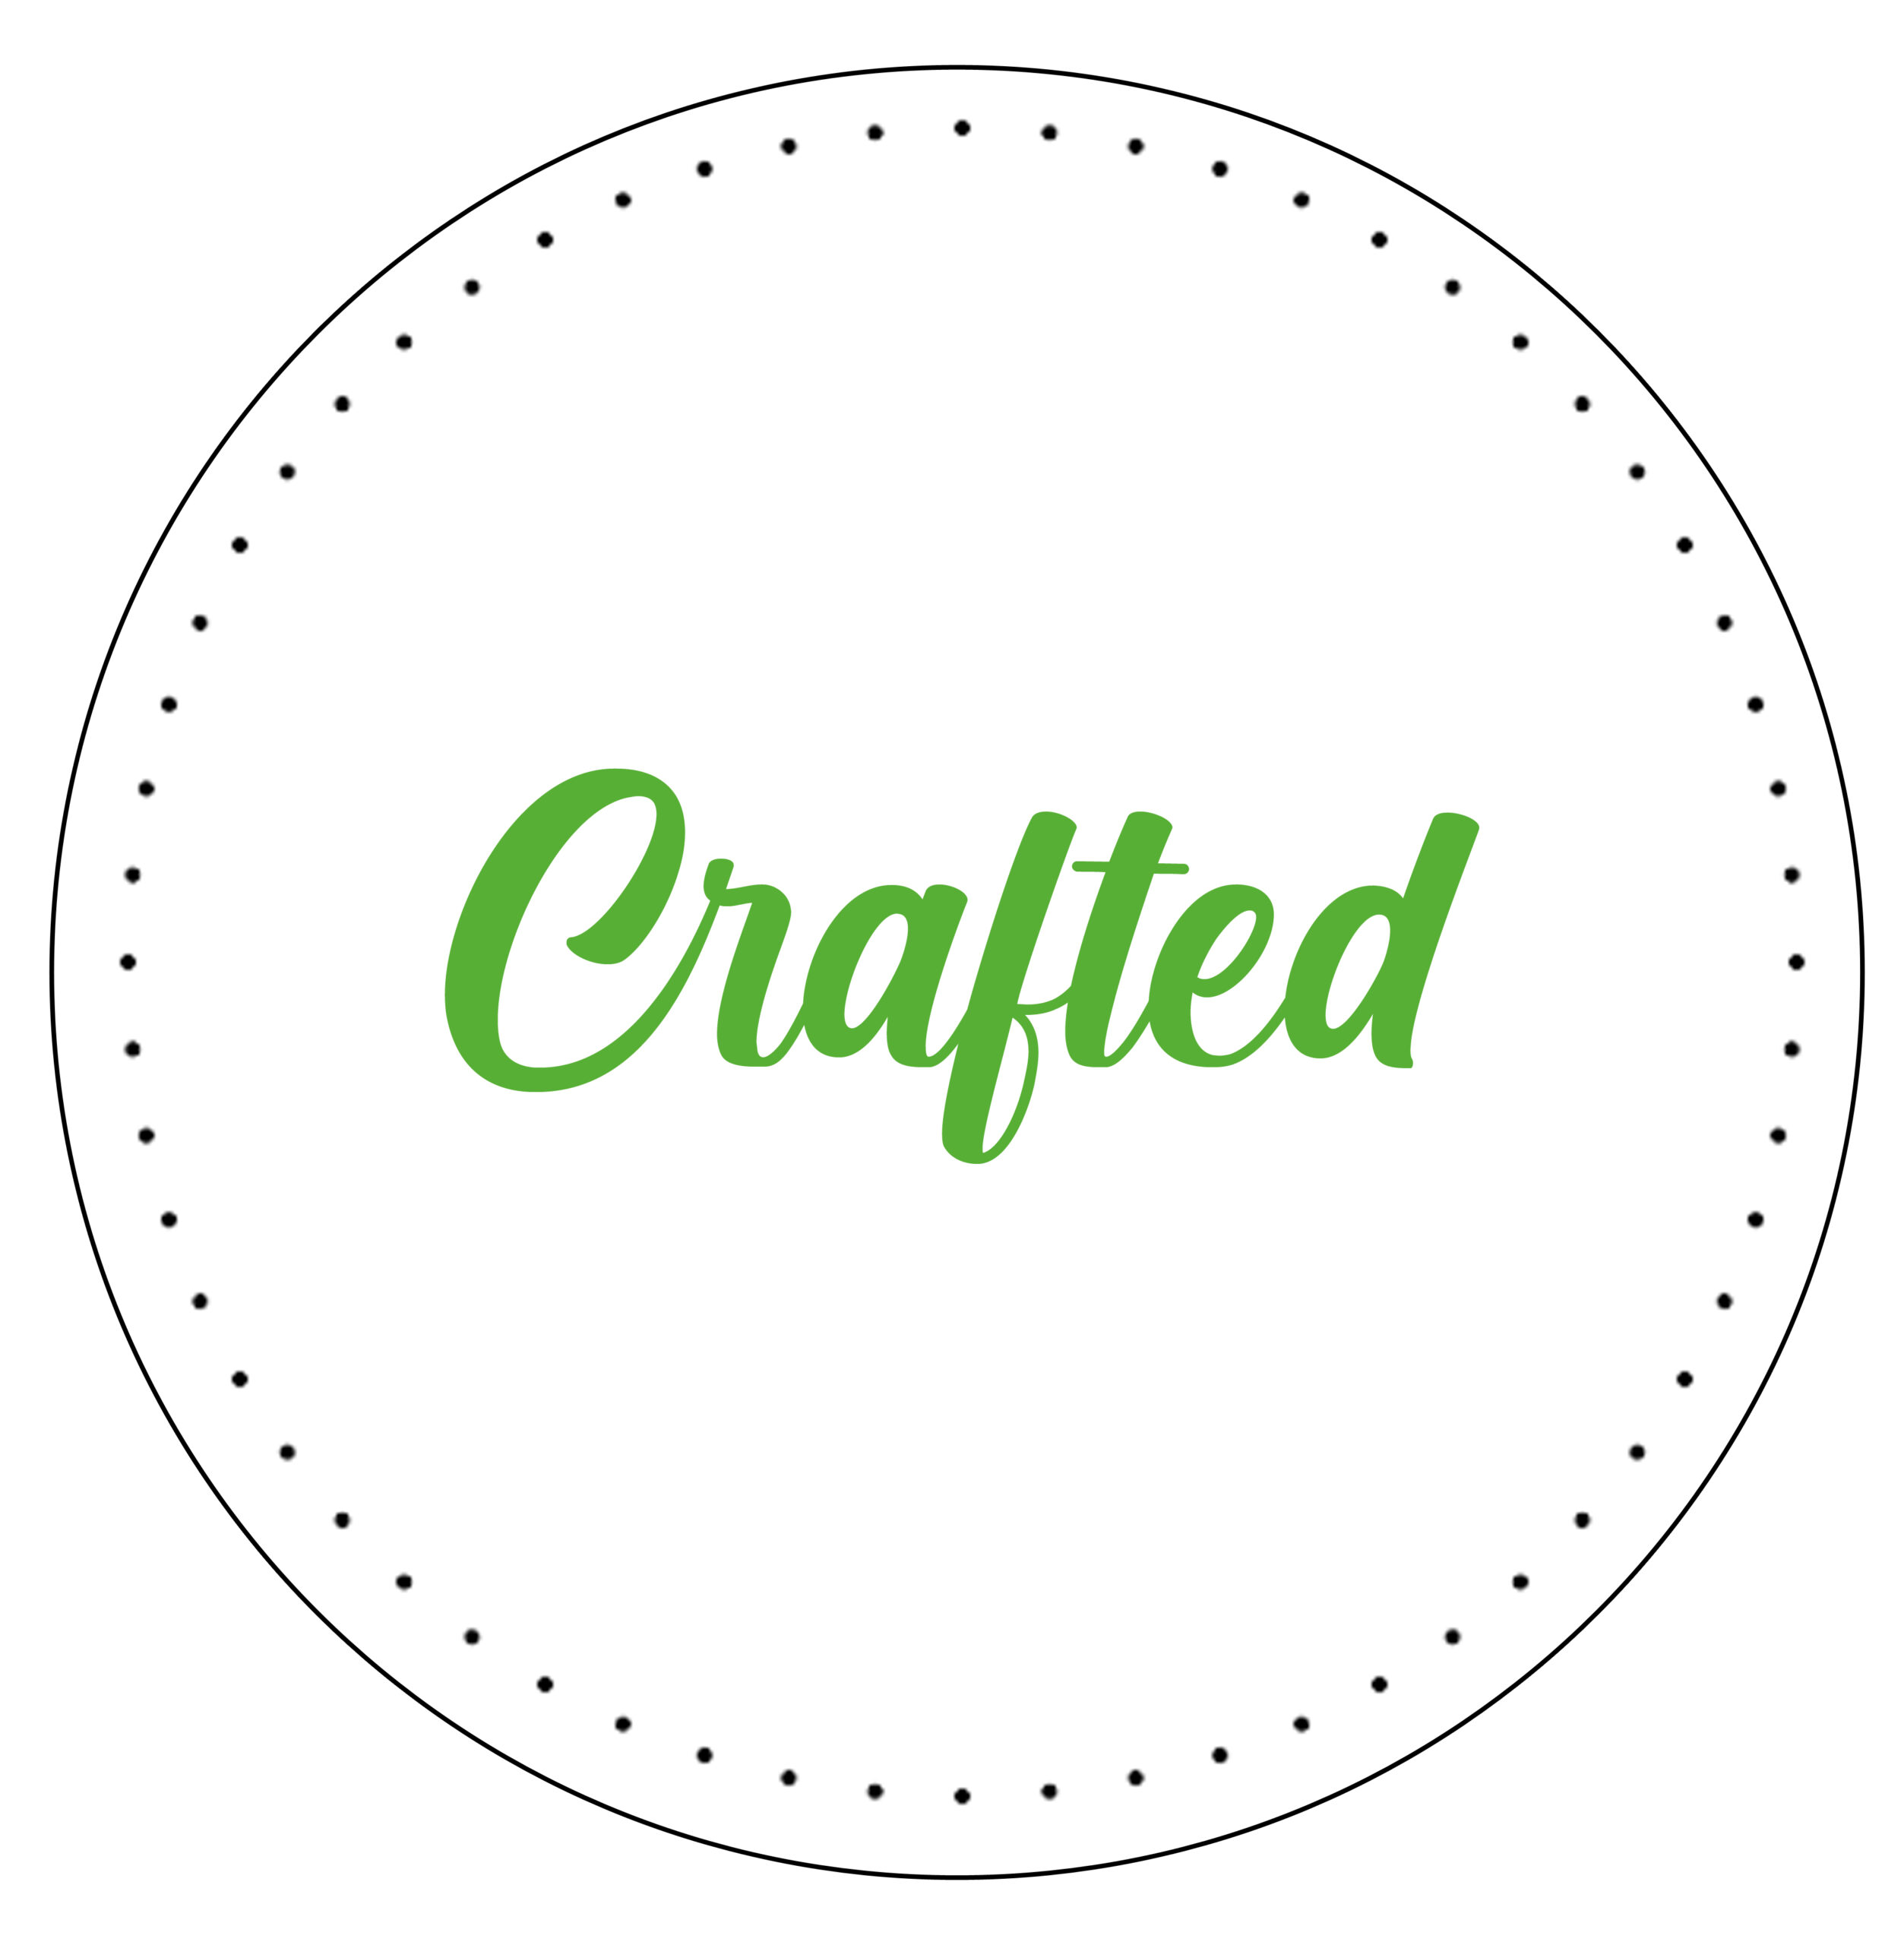 Crafted-HighRes-scaled